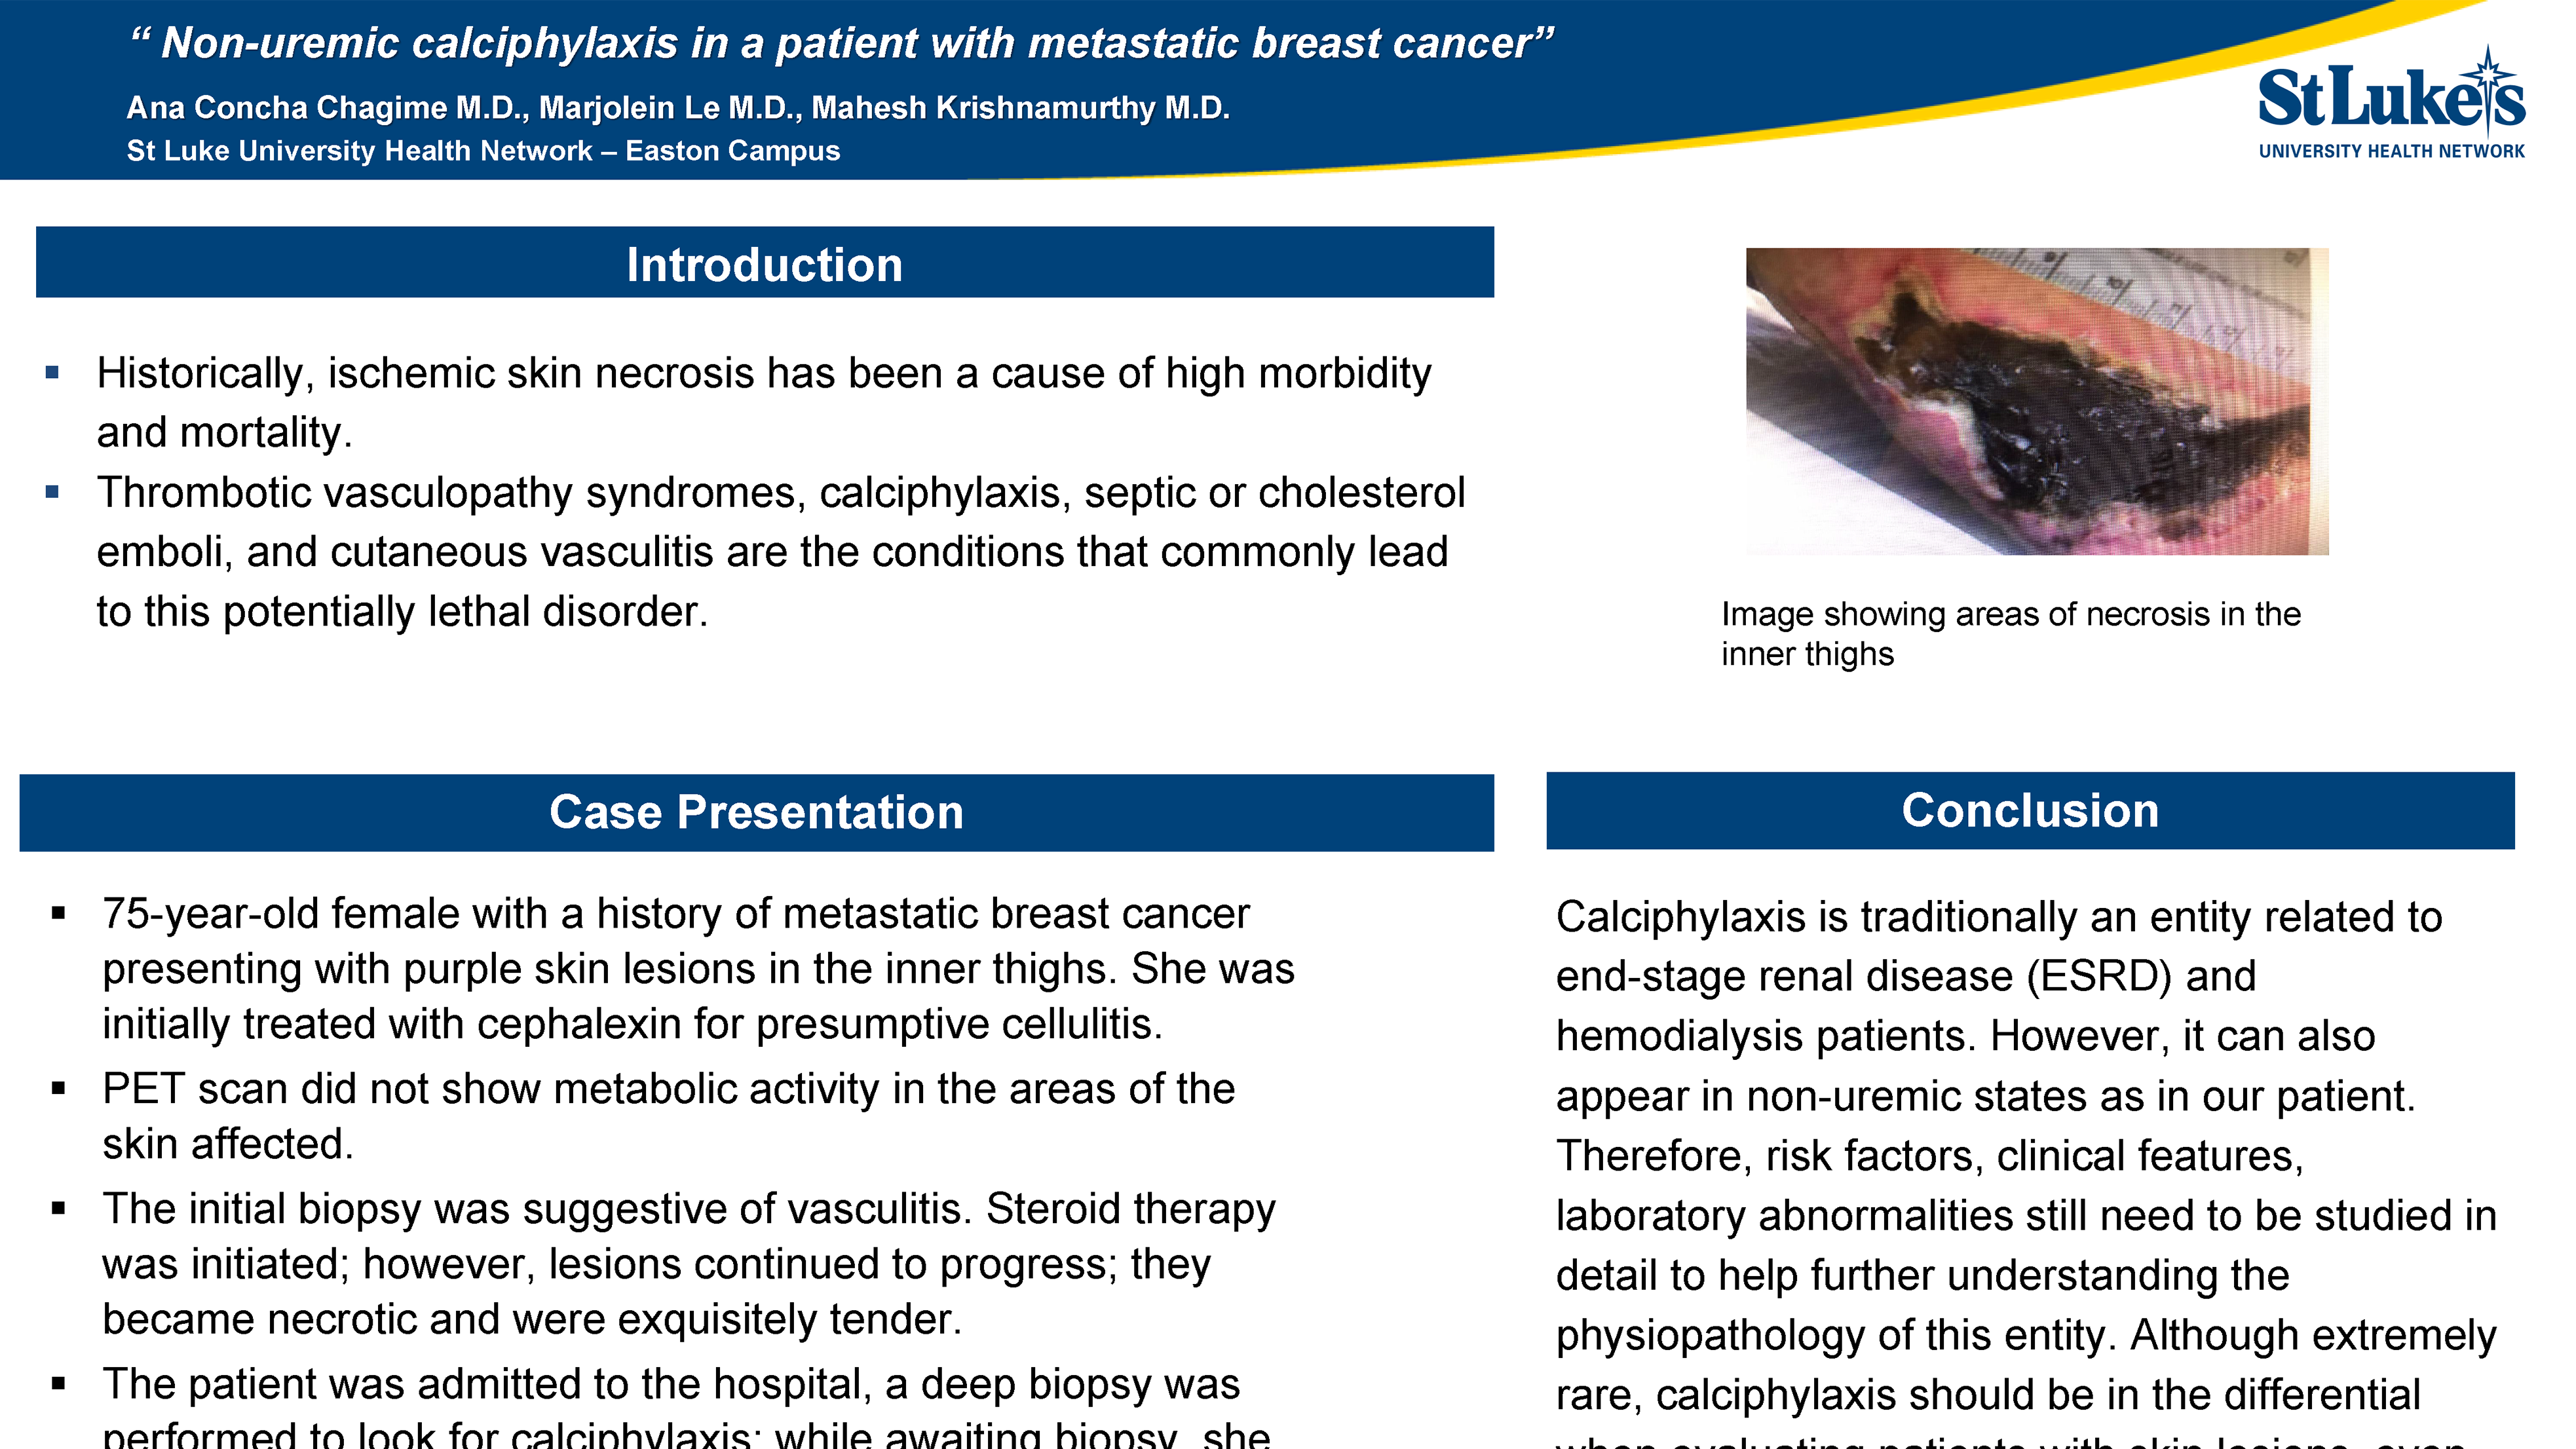 Ana V Concha - PAE 46 Non-uremic calciphylaxis in a patient with metastatic breast cancer